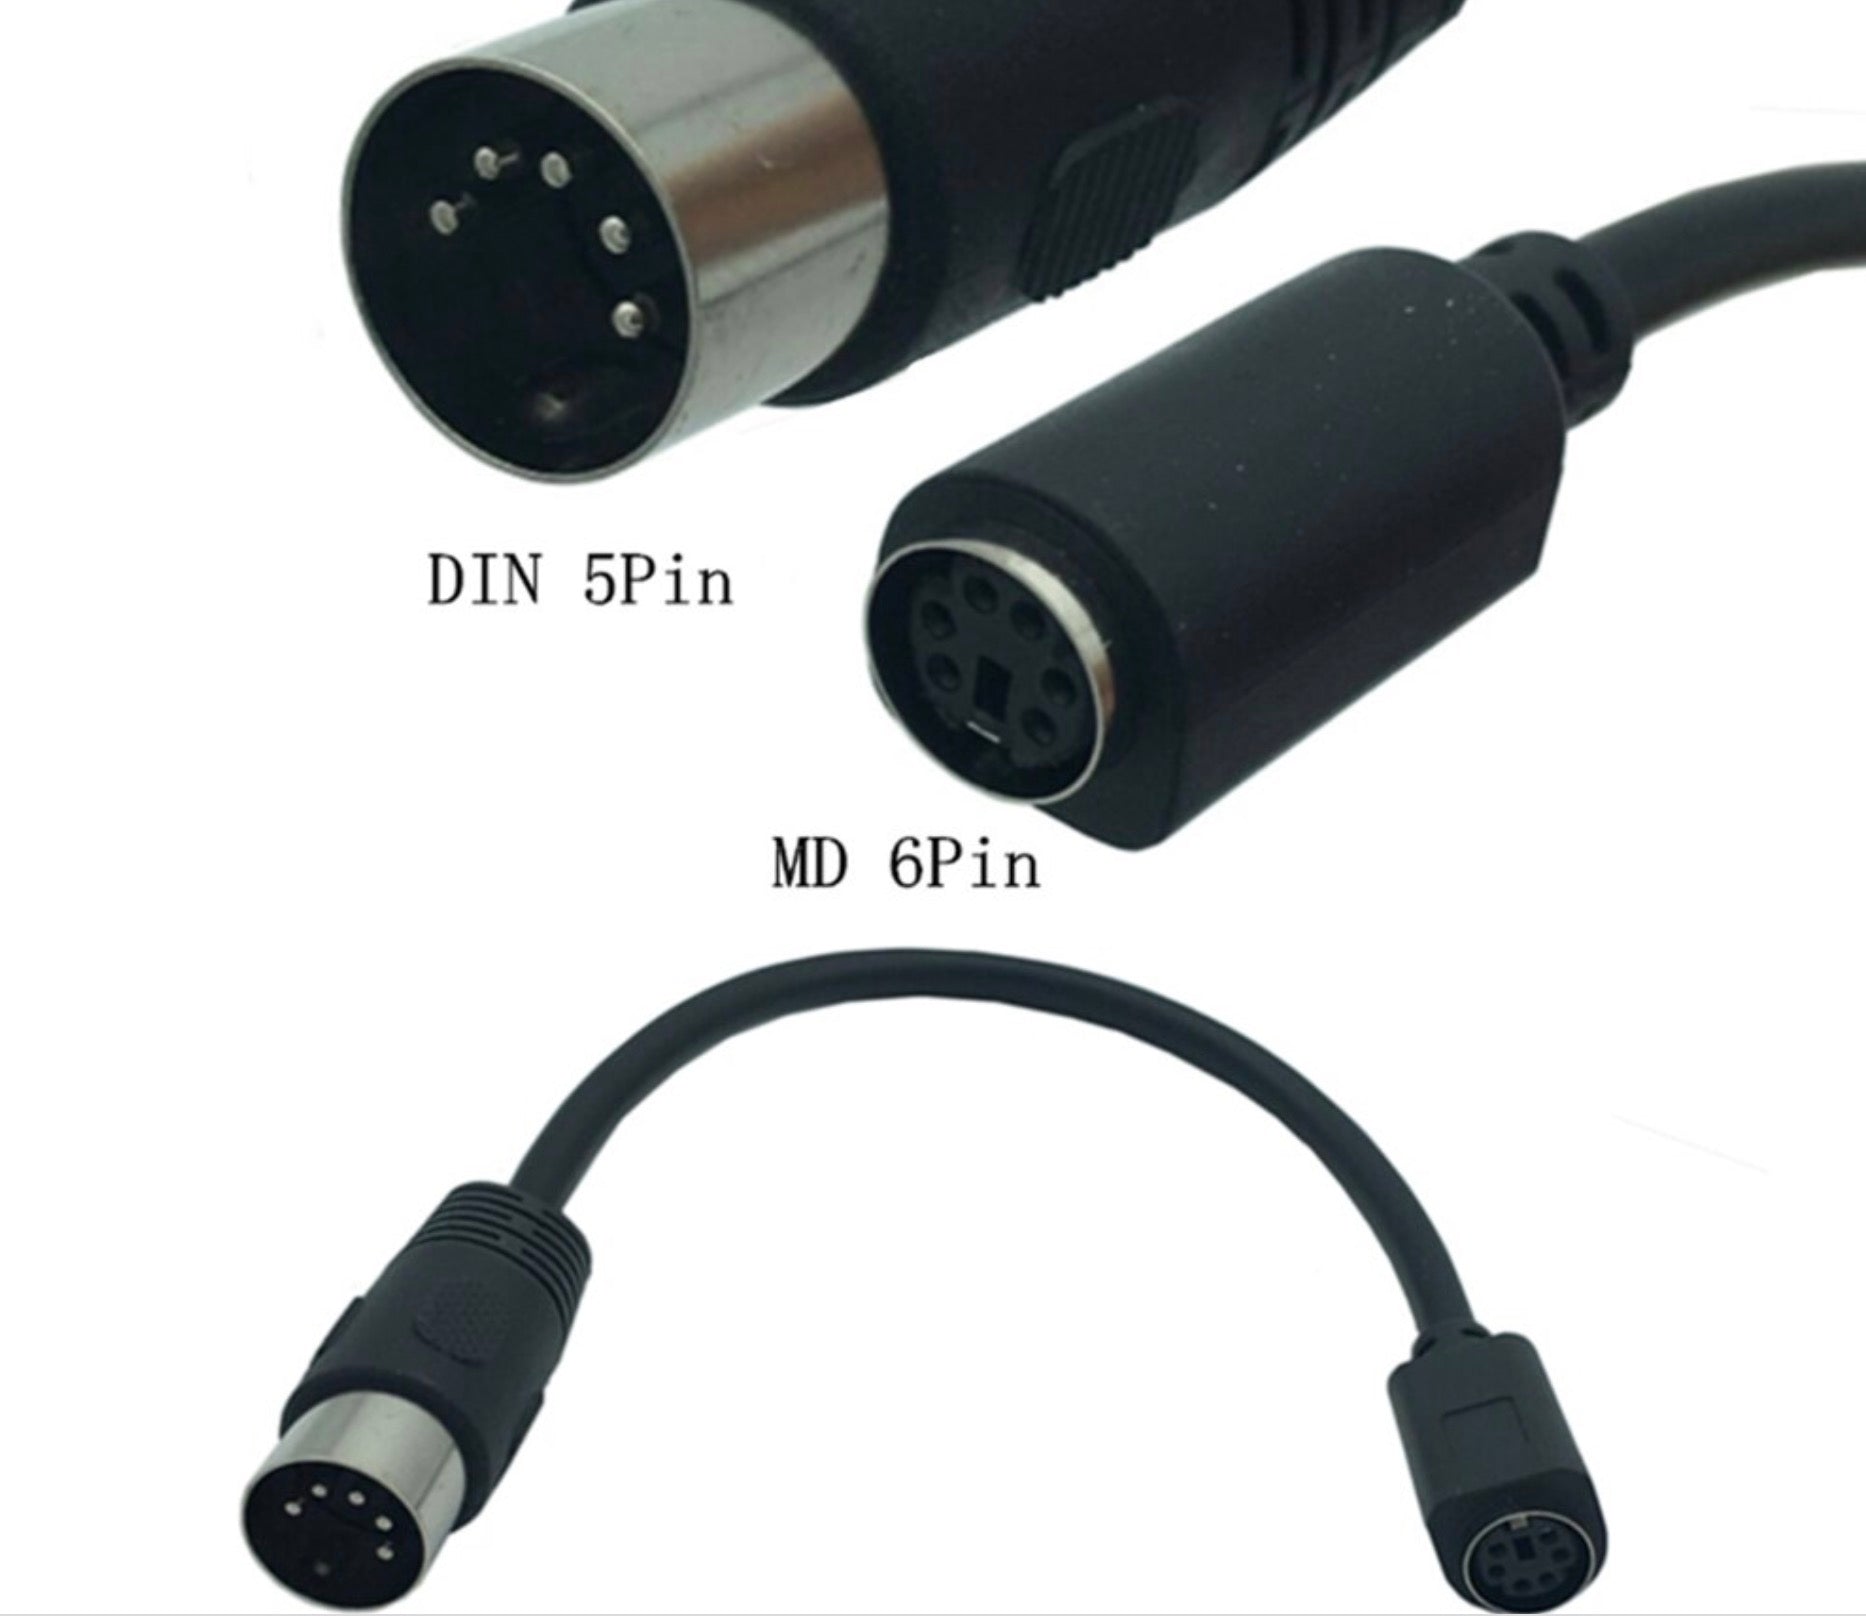 5-Pin Din Male to Mini Din 6-pin PS2 Female Keyboard Adapter Converter Cable